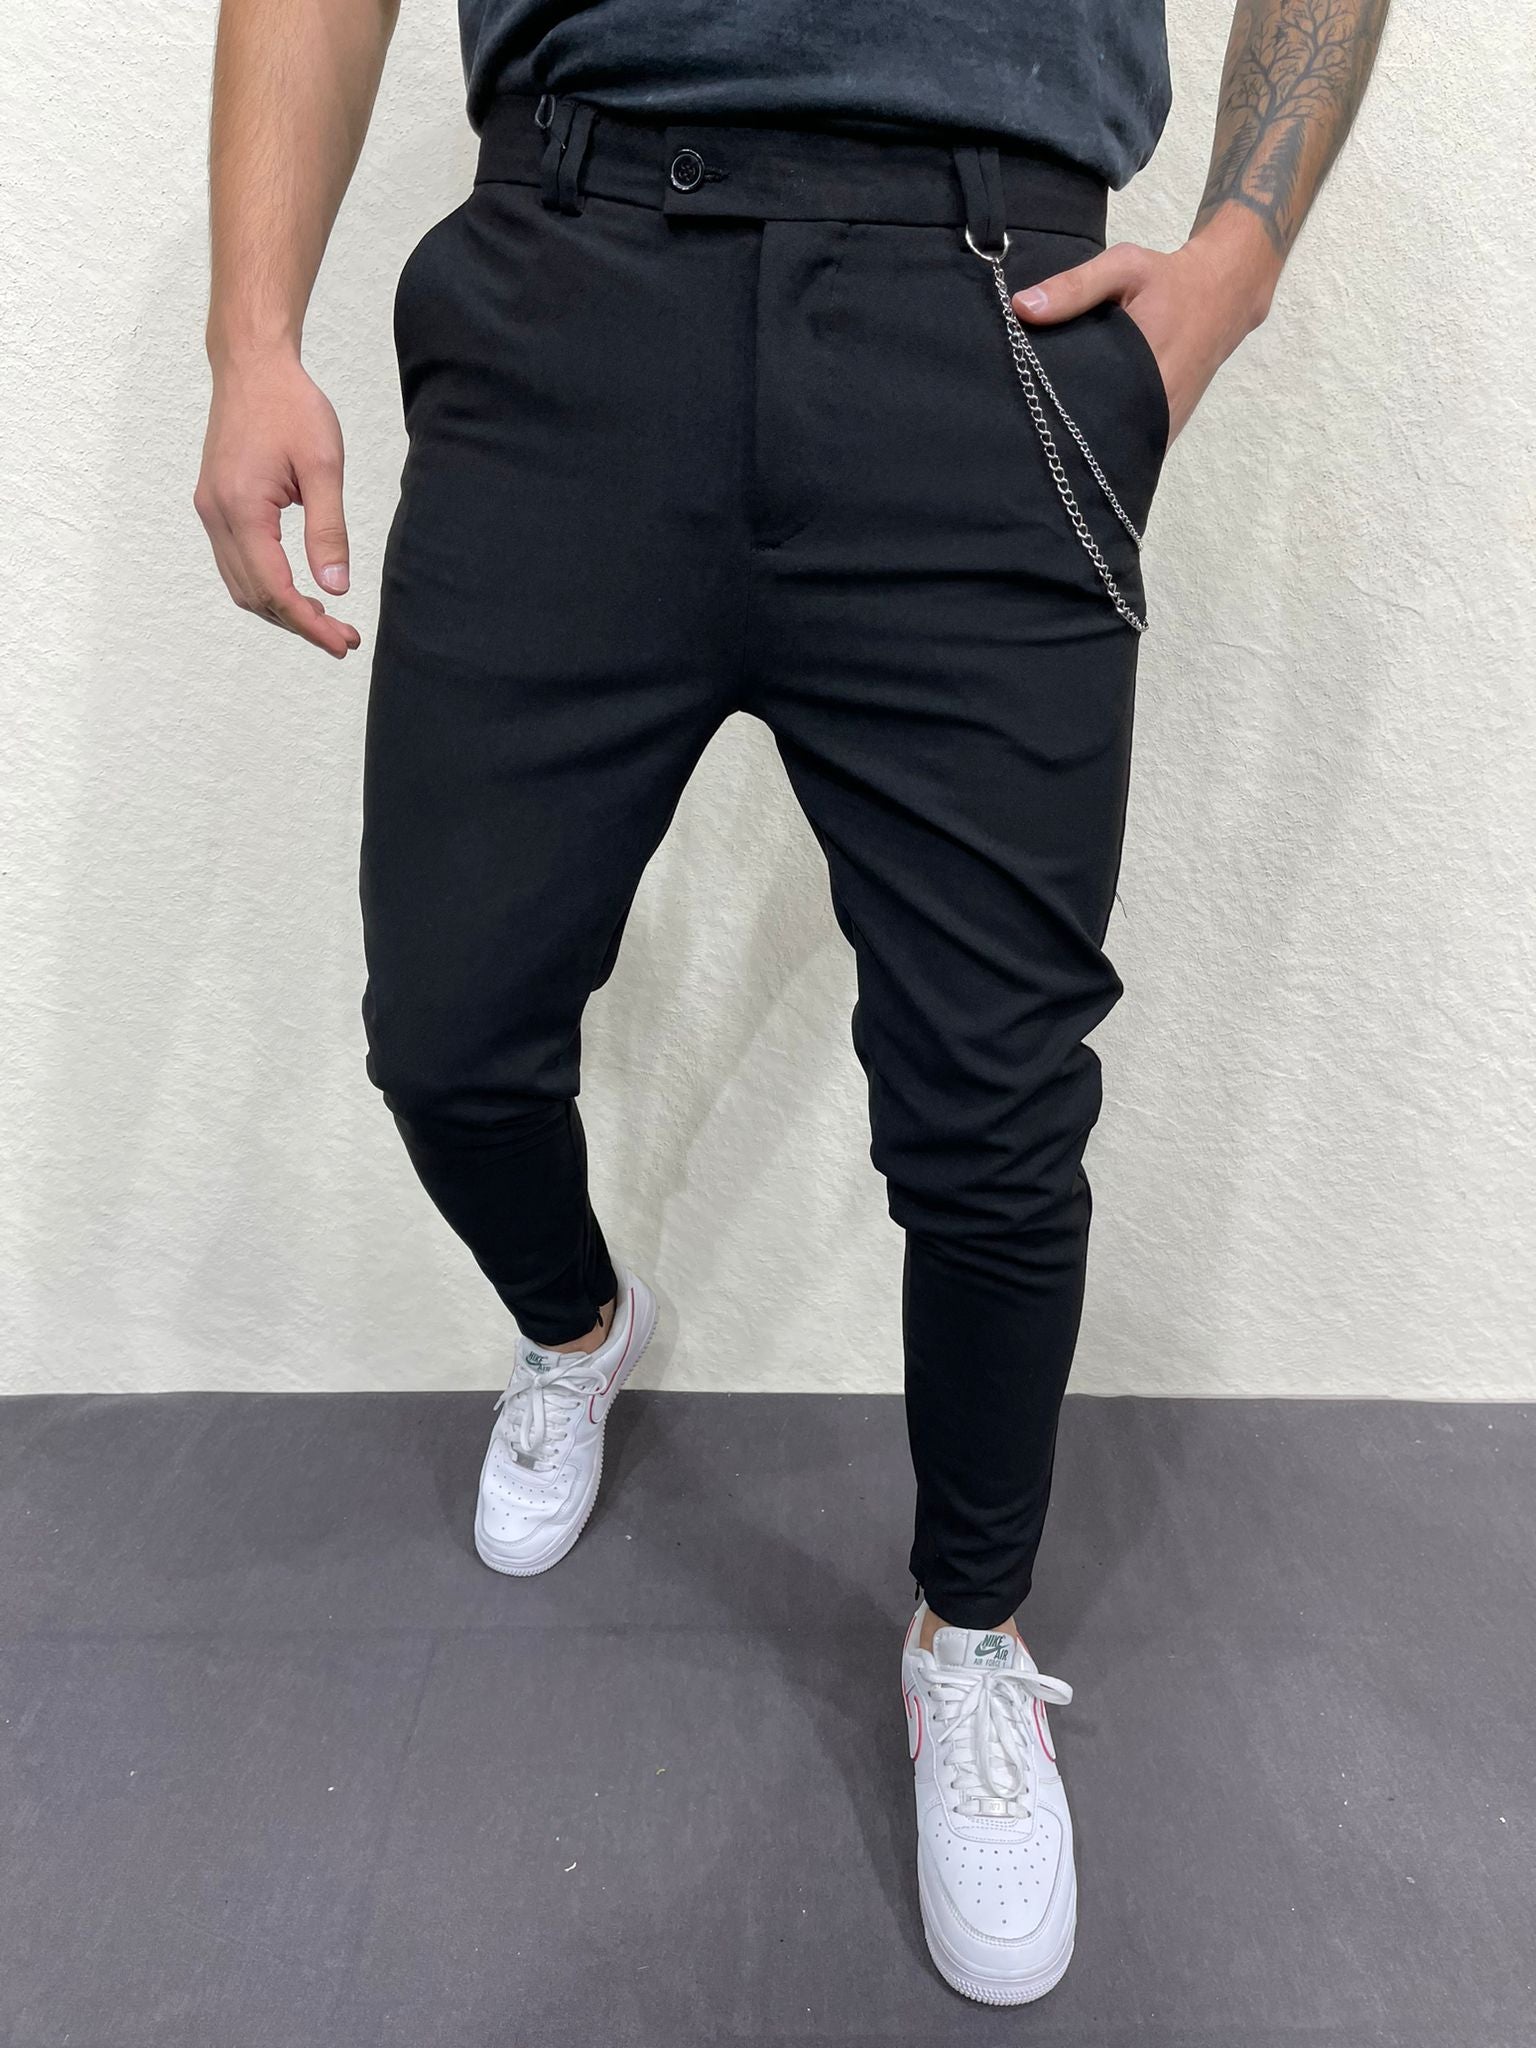 Breathable Mens Alo Yoga Shorts Men LL 21413 Fifth Pants For Running, Gym,  And Sports Training From Ai802, $14.53 | DHgate.Com